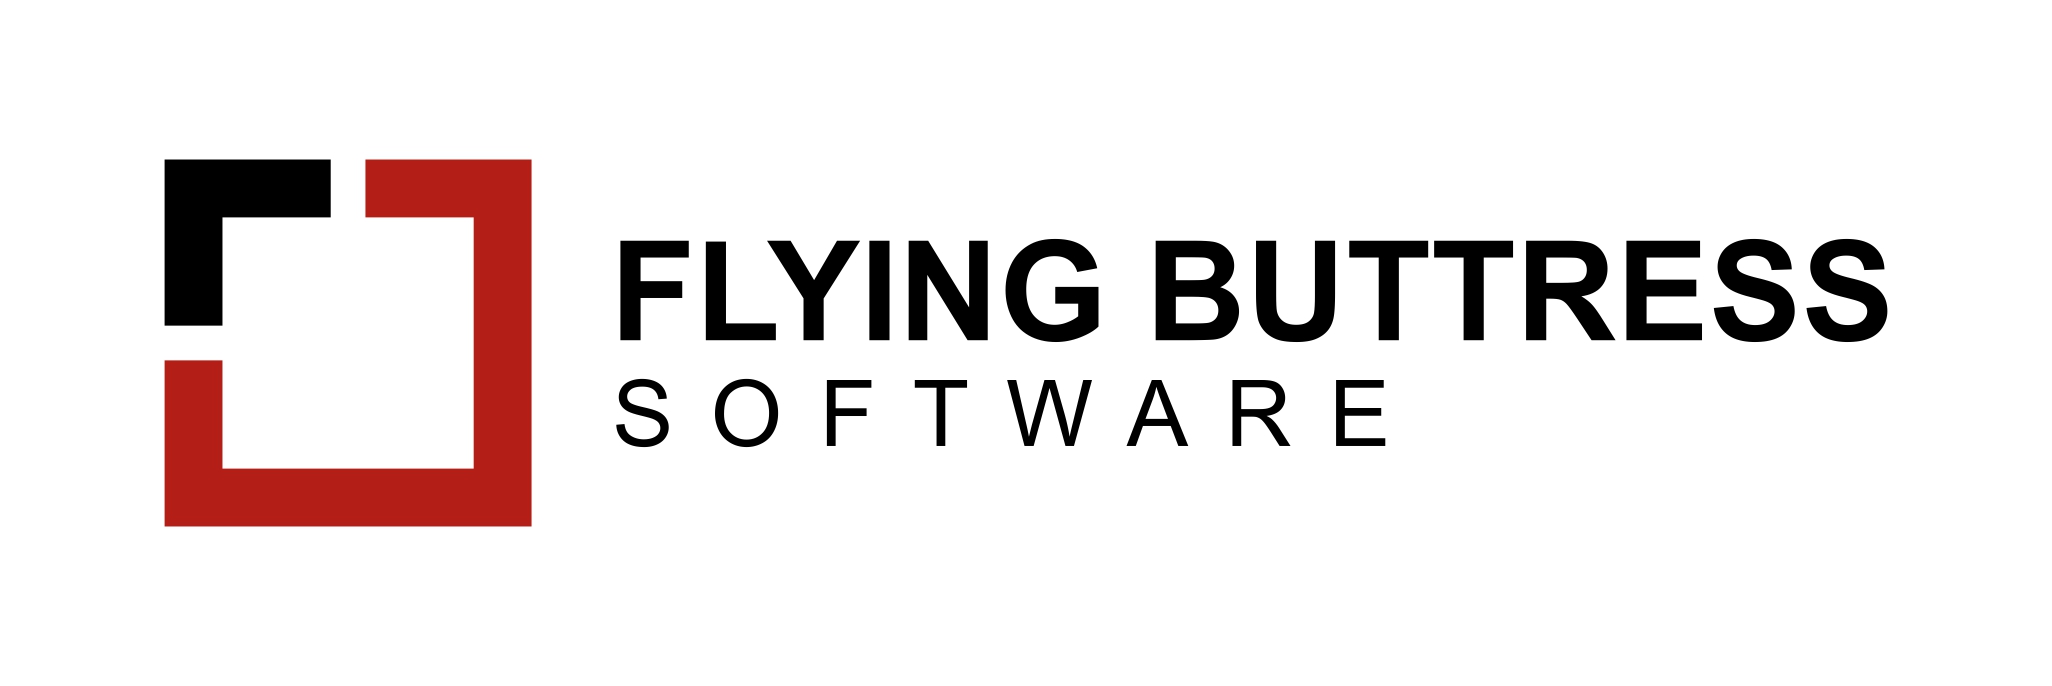 Flying Buttress Software